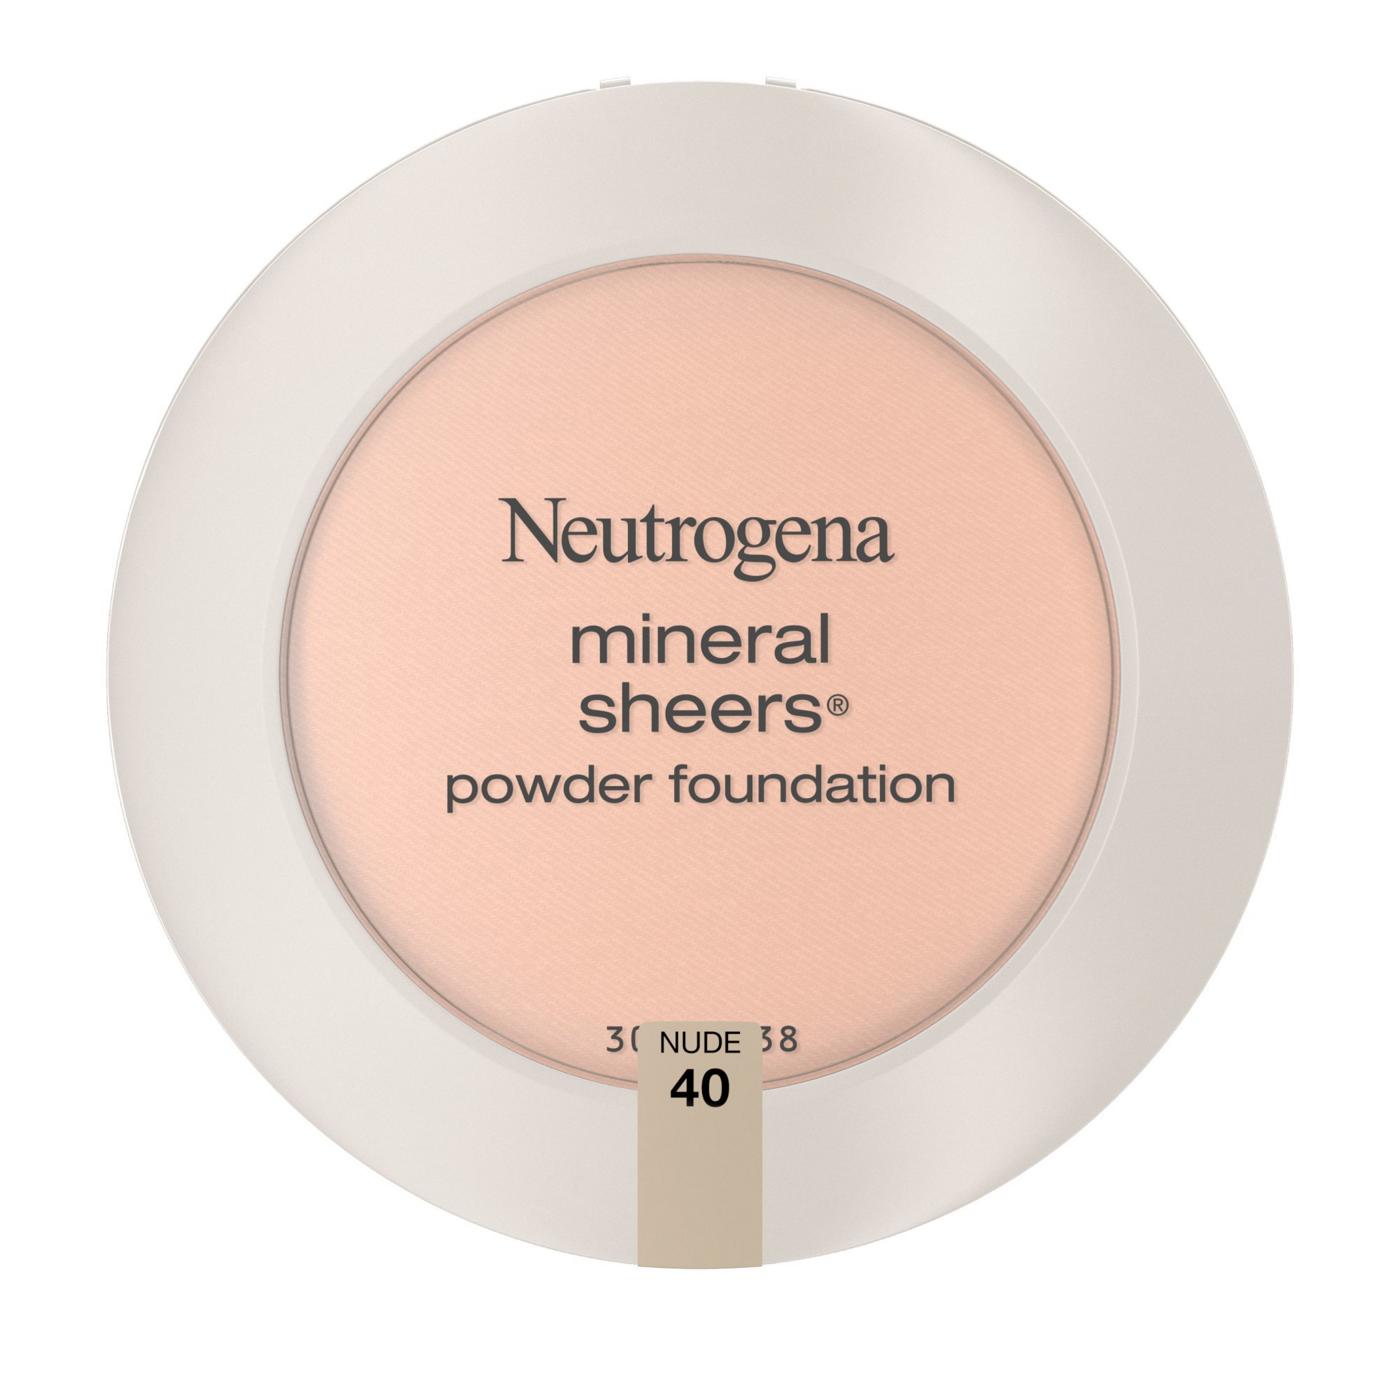 Neutrogena Mineral Sheers 40 Nude Compact Powder Foundation; image 1 of 6